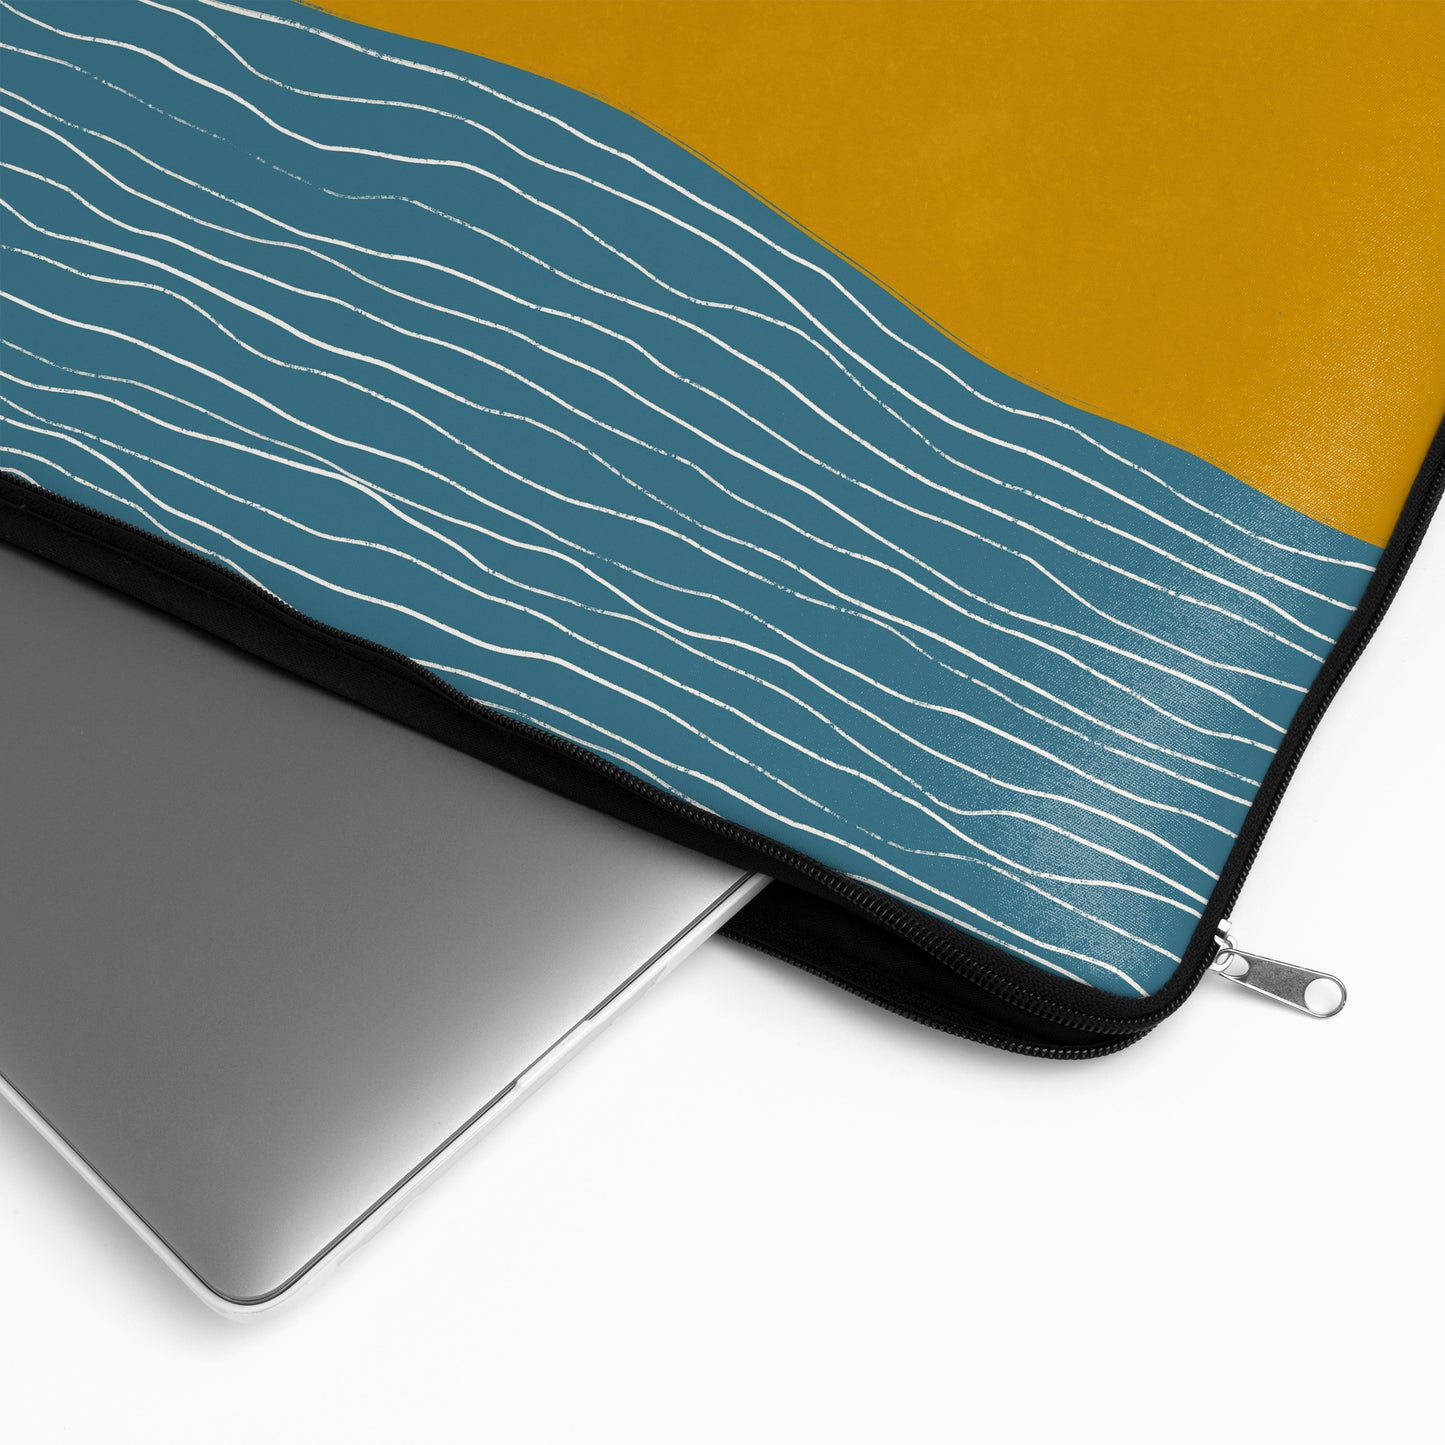 Abstract Beach Blue and Yellow - Laptop Sleeve